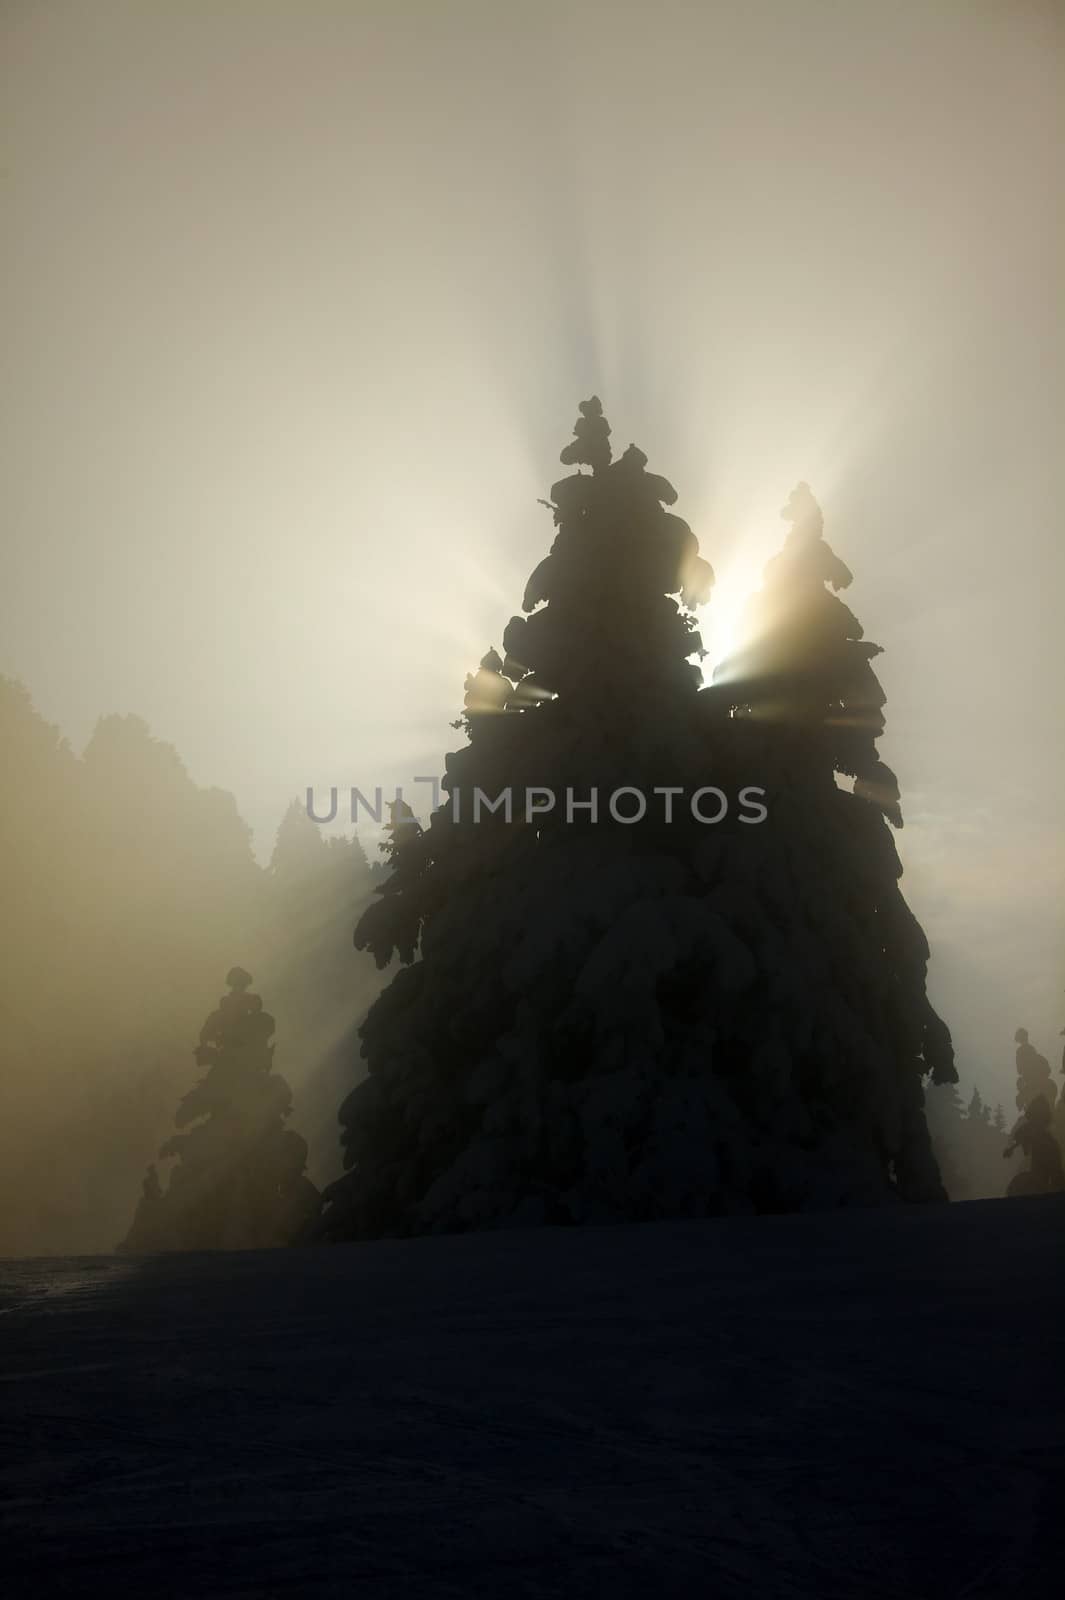 Snowy trees with sunlight filtering through the fog